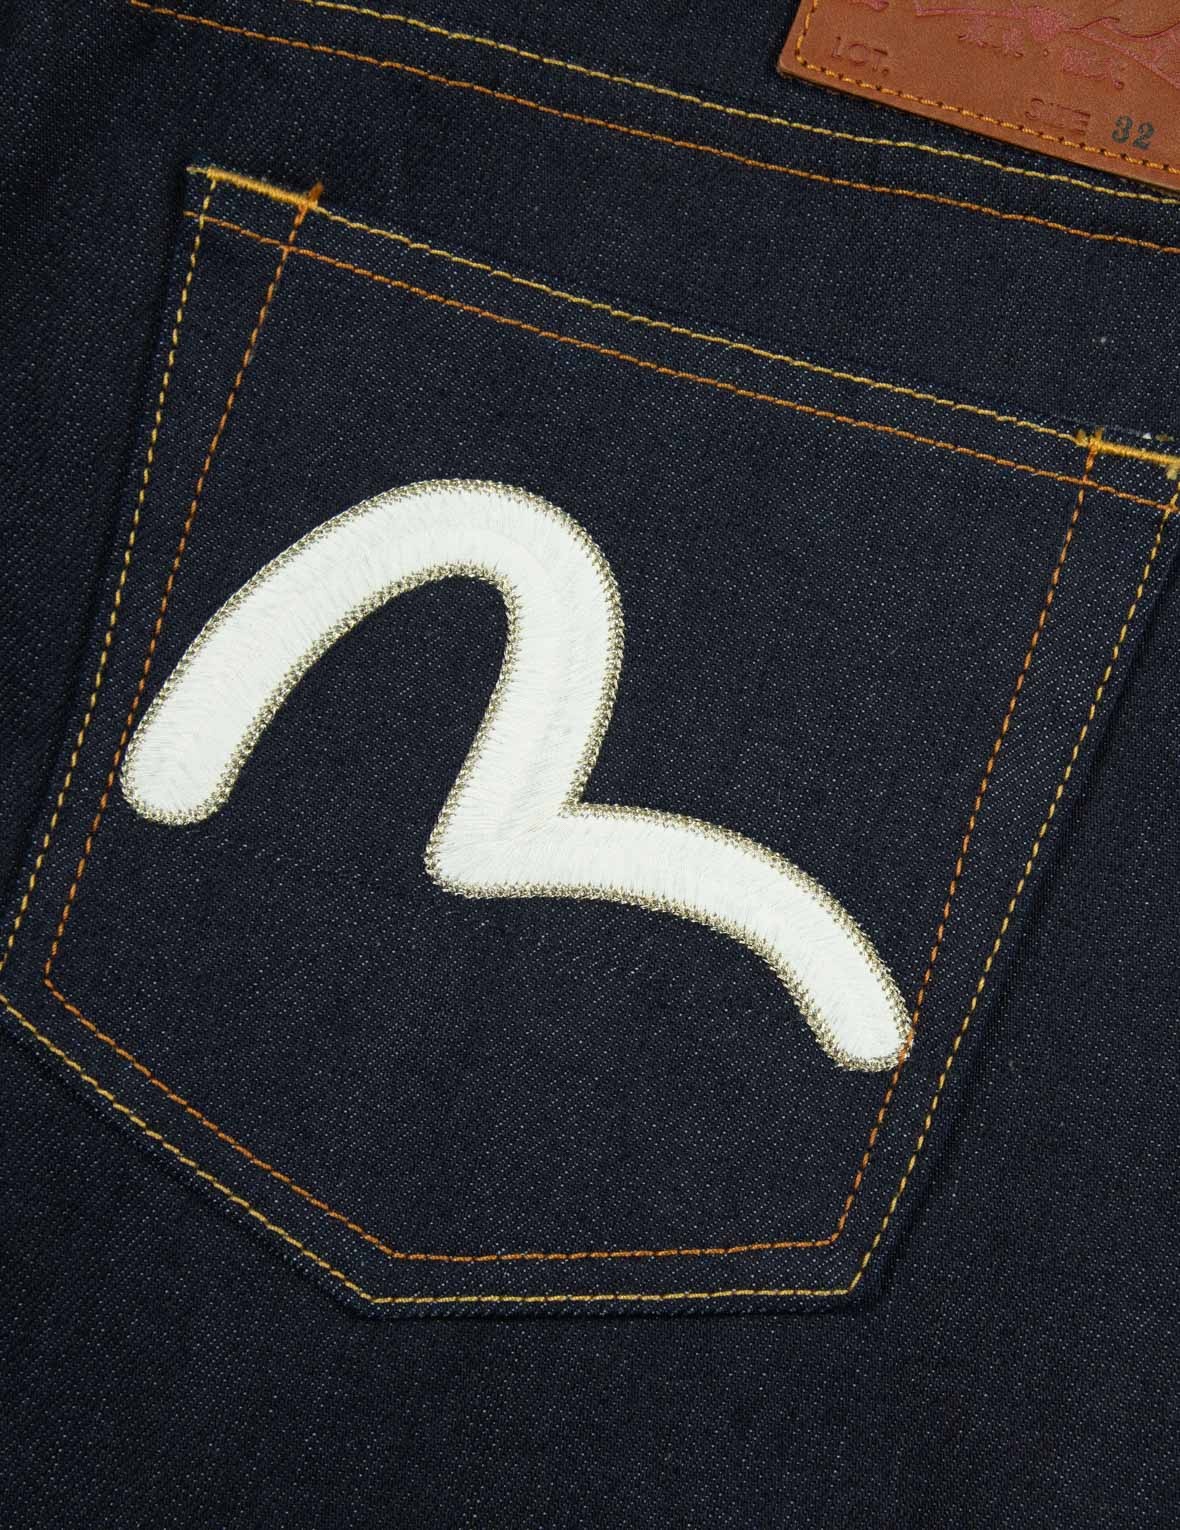 SEAGULL EMBROIDERY 3D CUT JEANS - 7